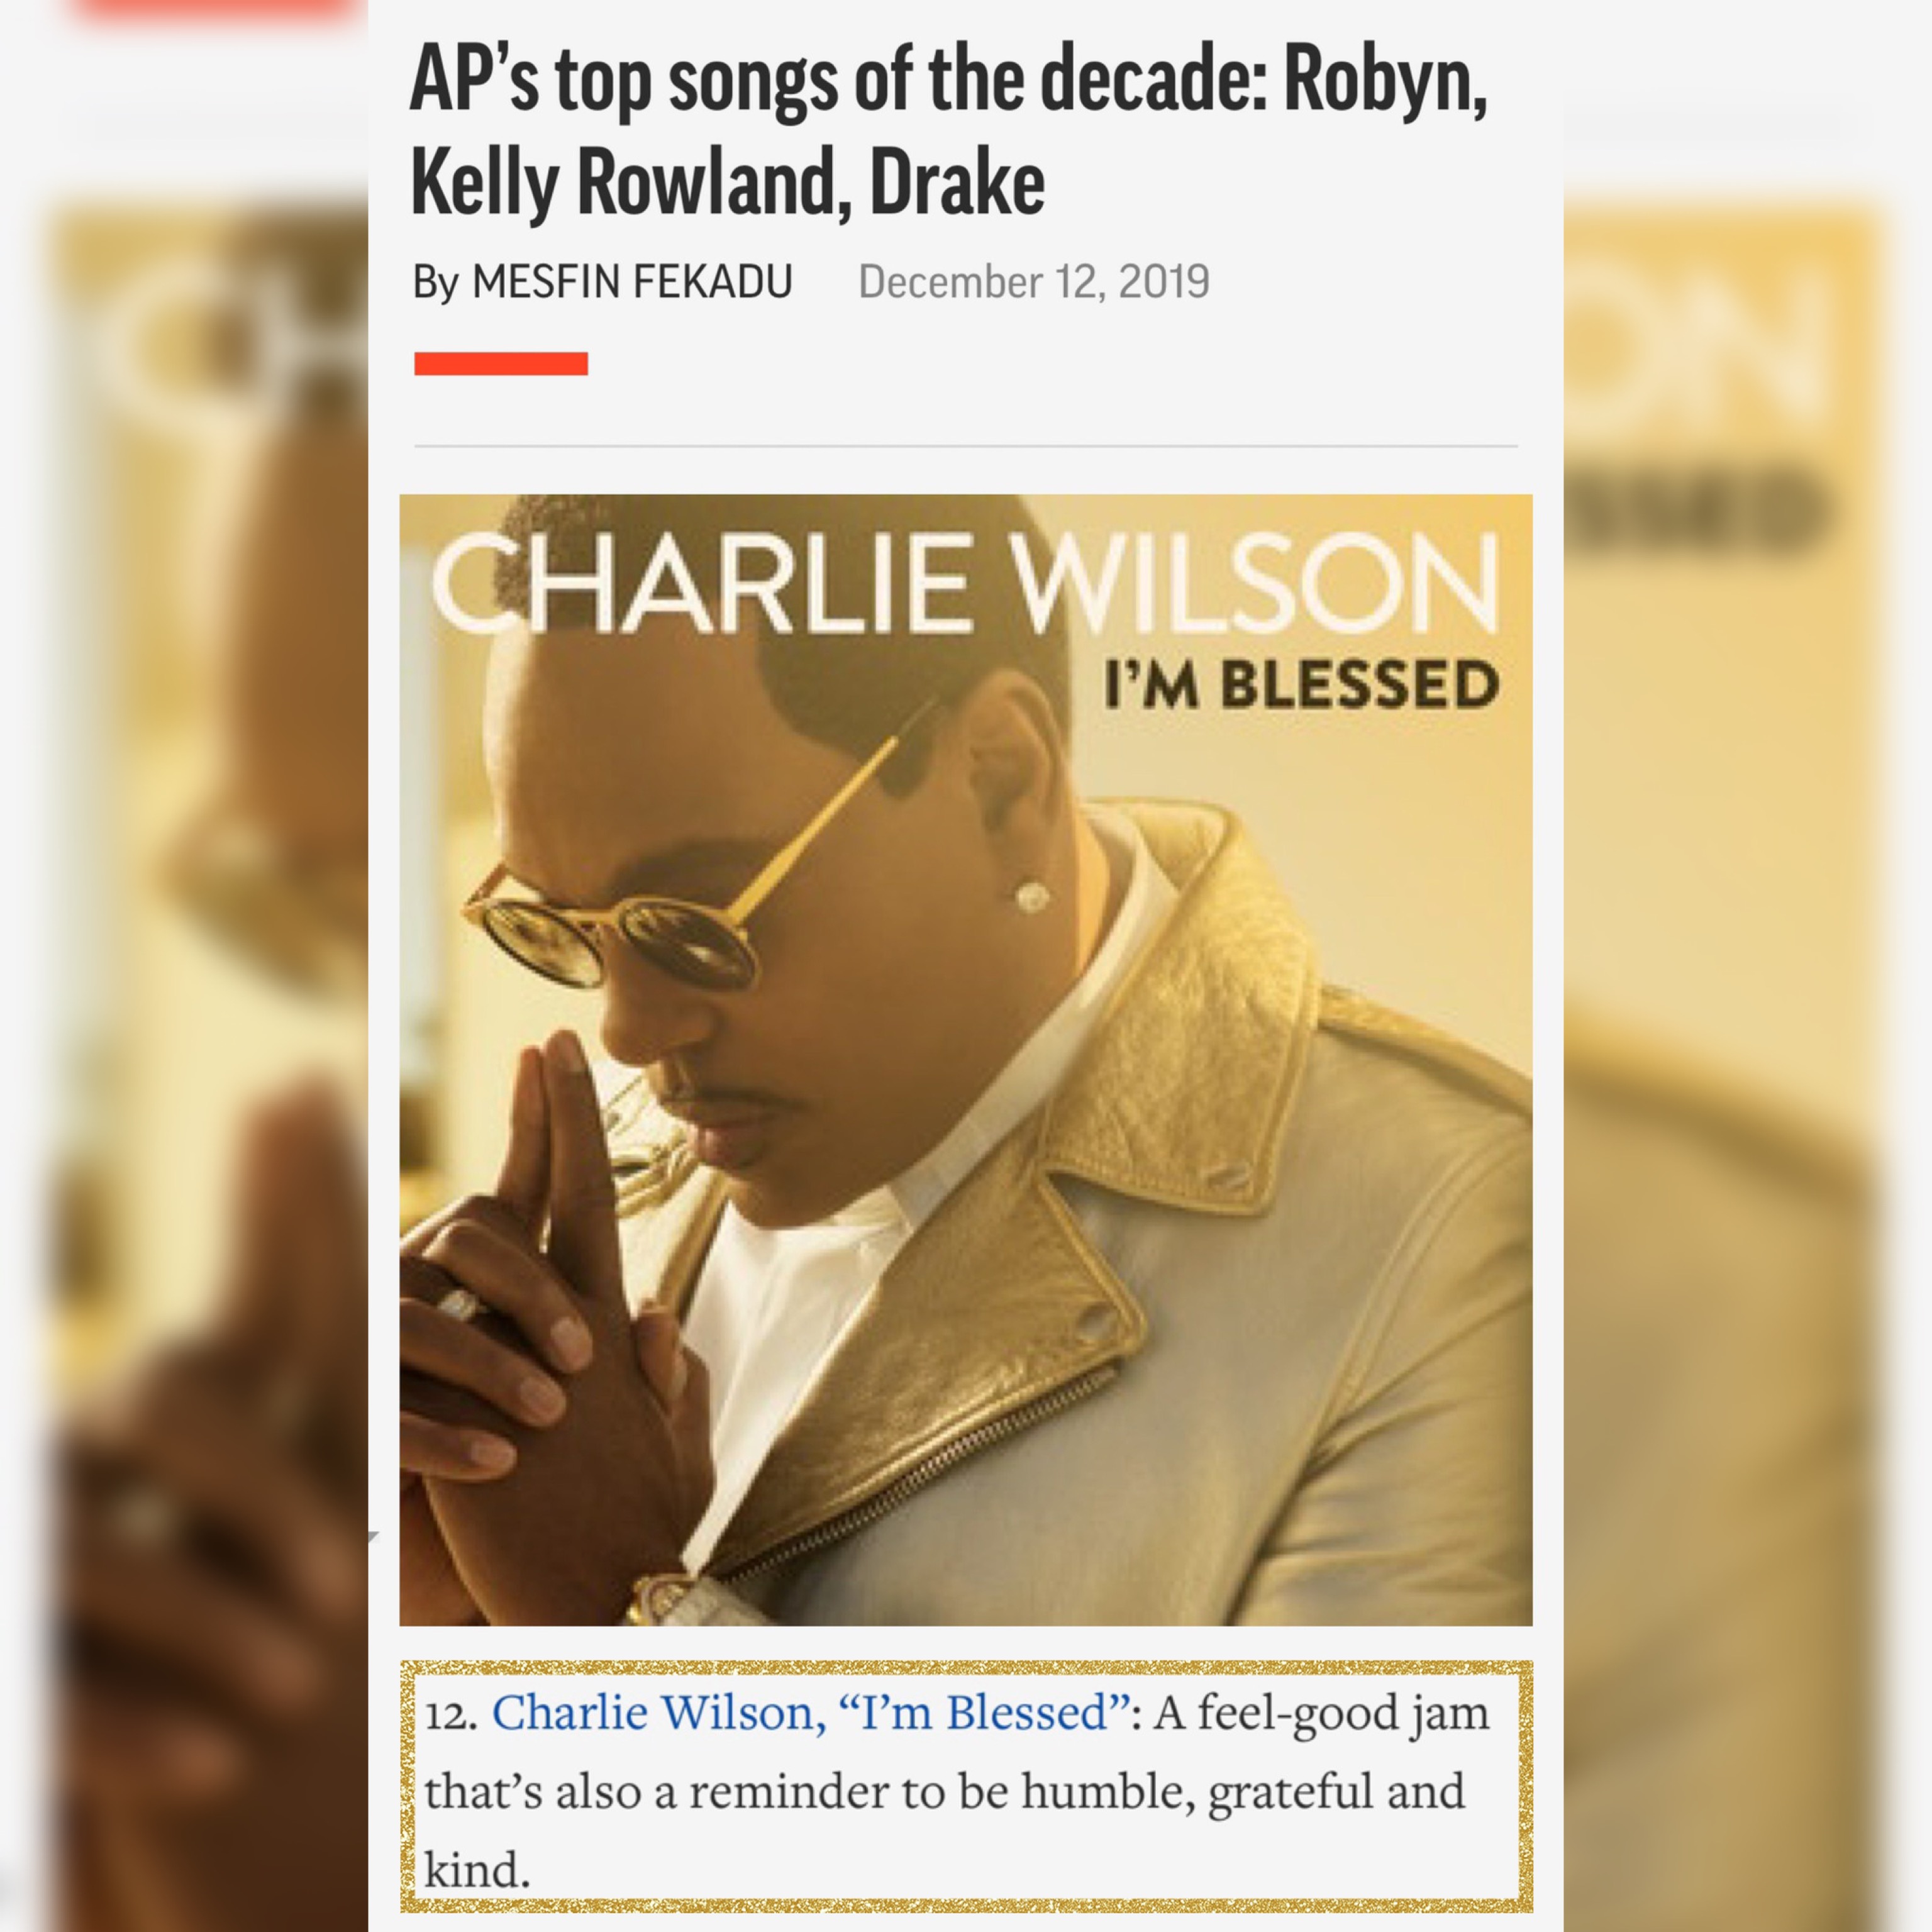 I'm Blessed Named One of Top Songs of the Decade by the Press - Charlie Wilson